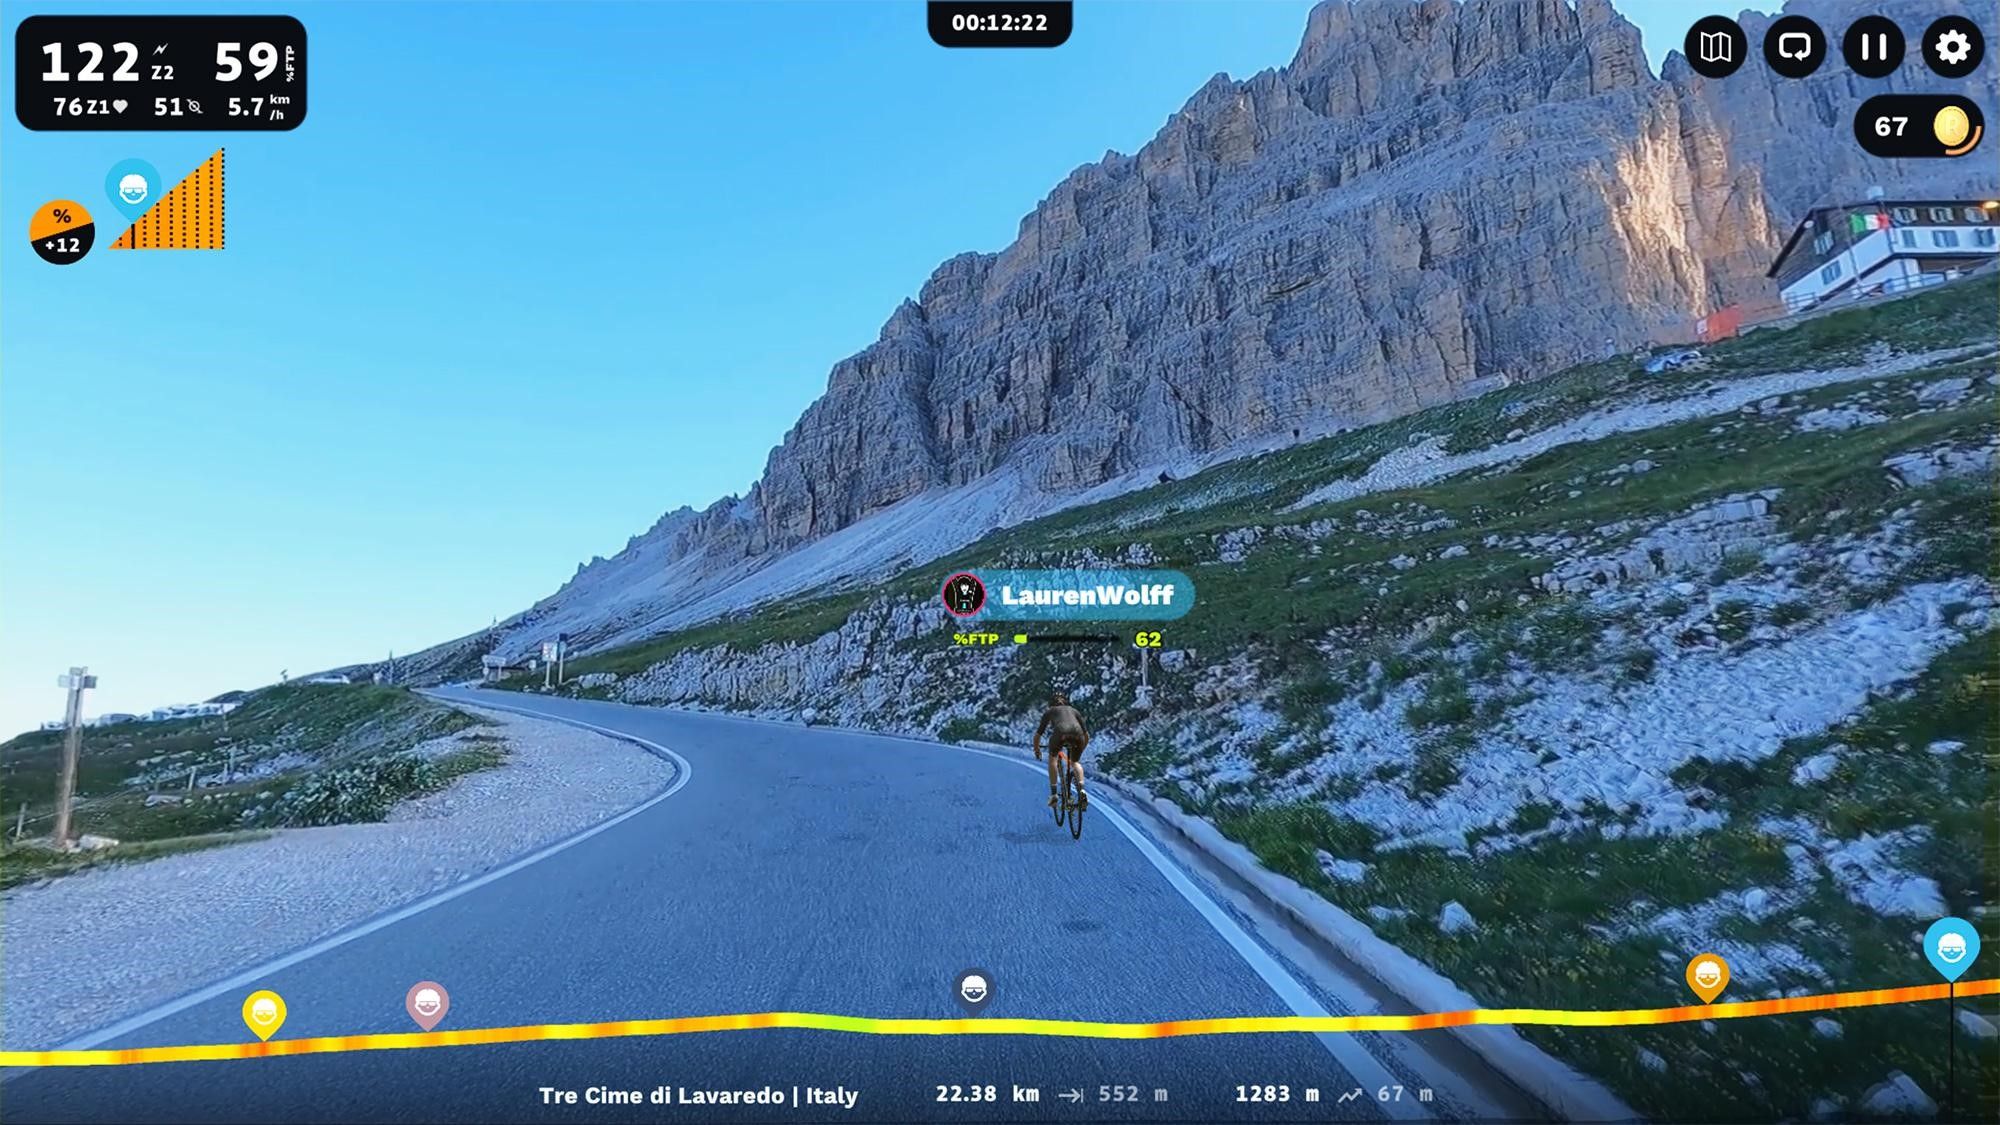 Conquer the numerous slopes and switchbacks on the Tre Cime di Lavaredo on ROUVY